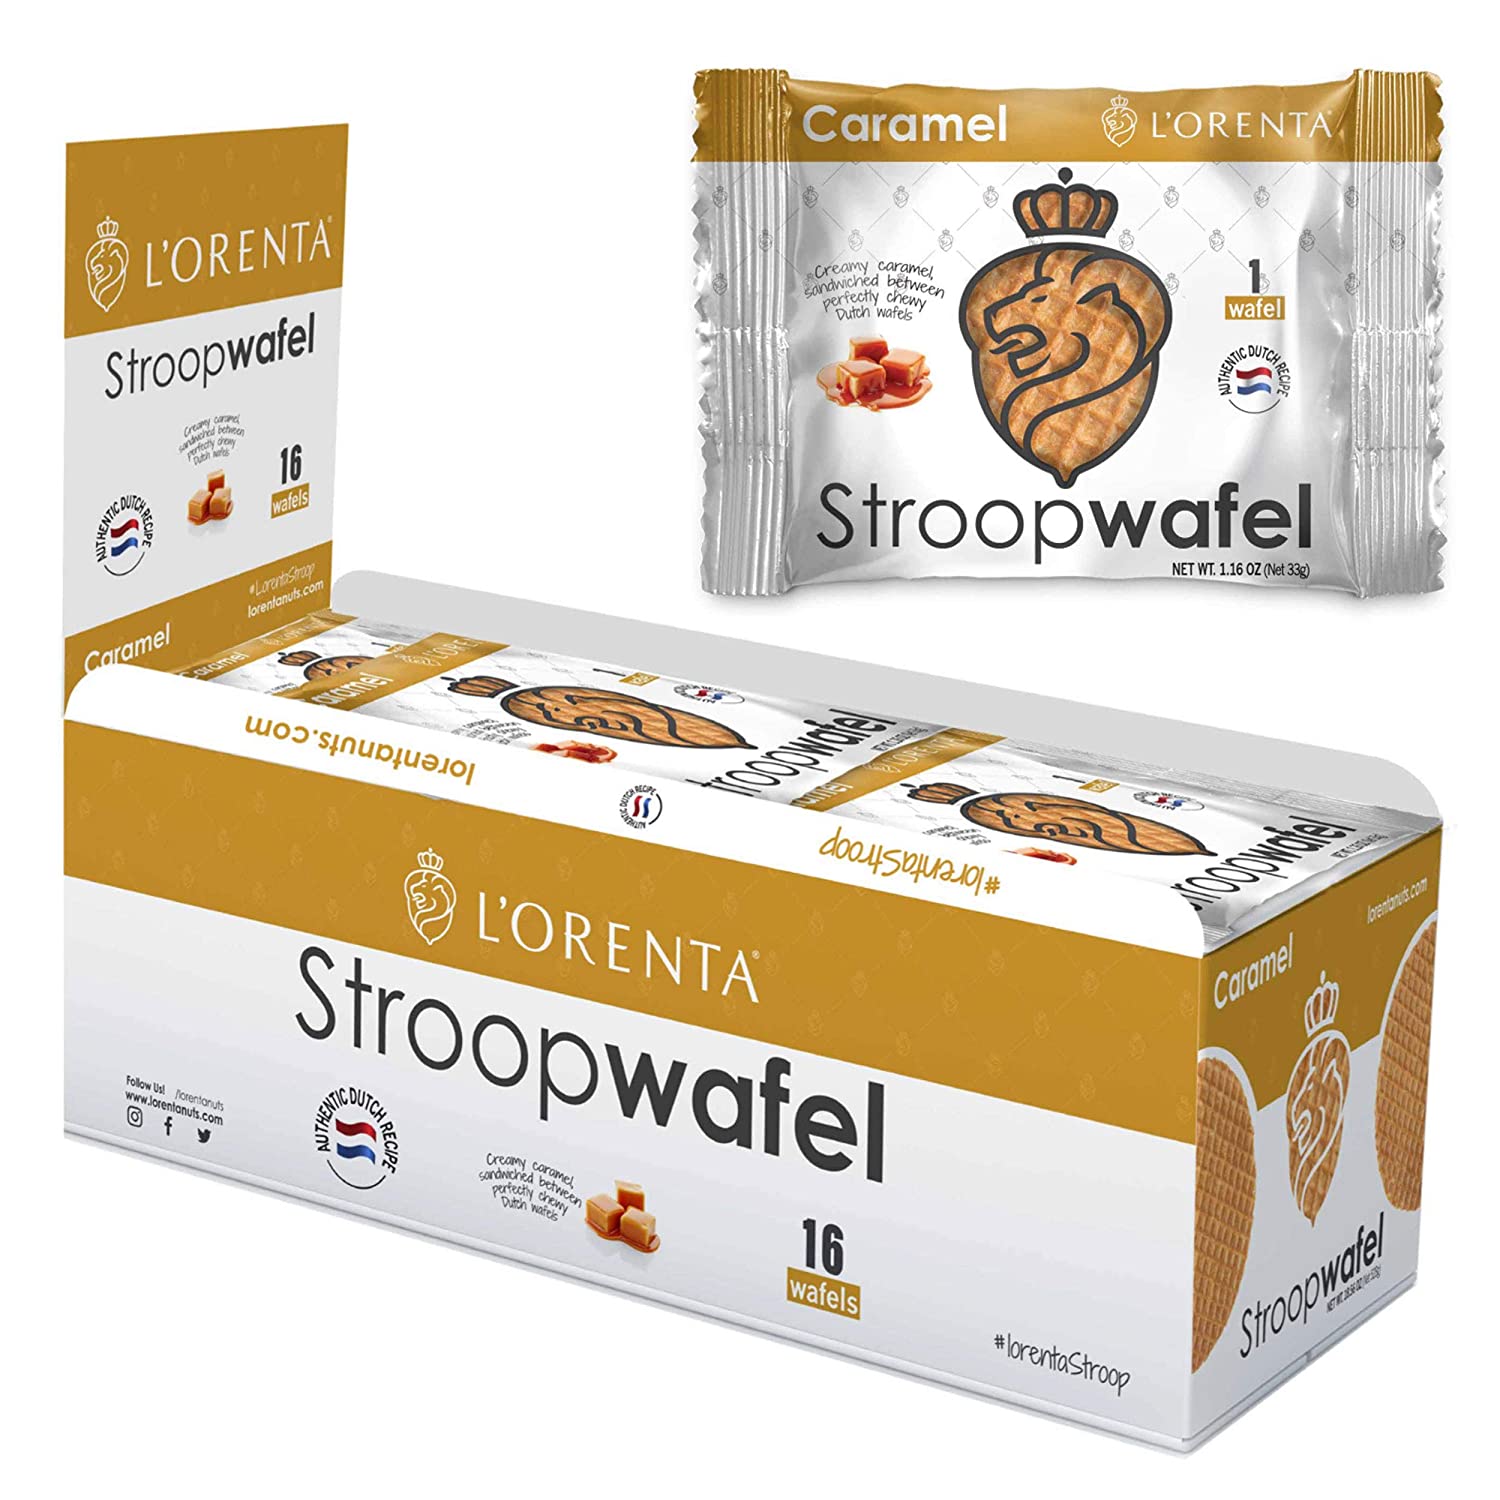 L'Orenta Stroopwafels - Wafer Cookies for Dunking In Coffee - Authentic Dutch Recipe - Non GMO - Made By Dutch Bakers - No Artificial Sweeteners (Caramel, 16 Wafels) 饼干 